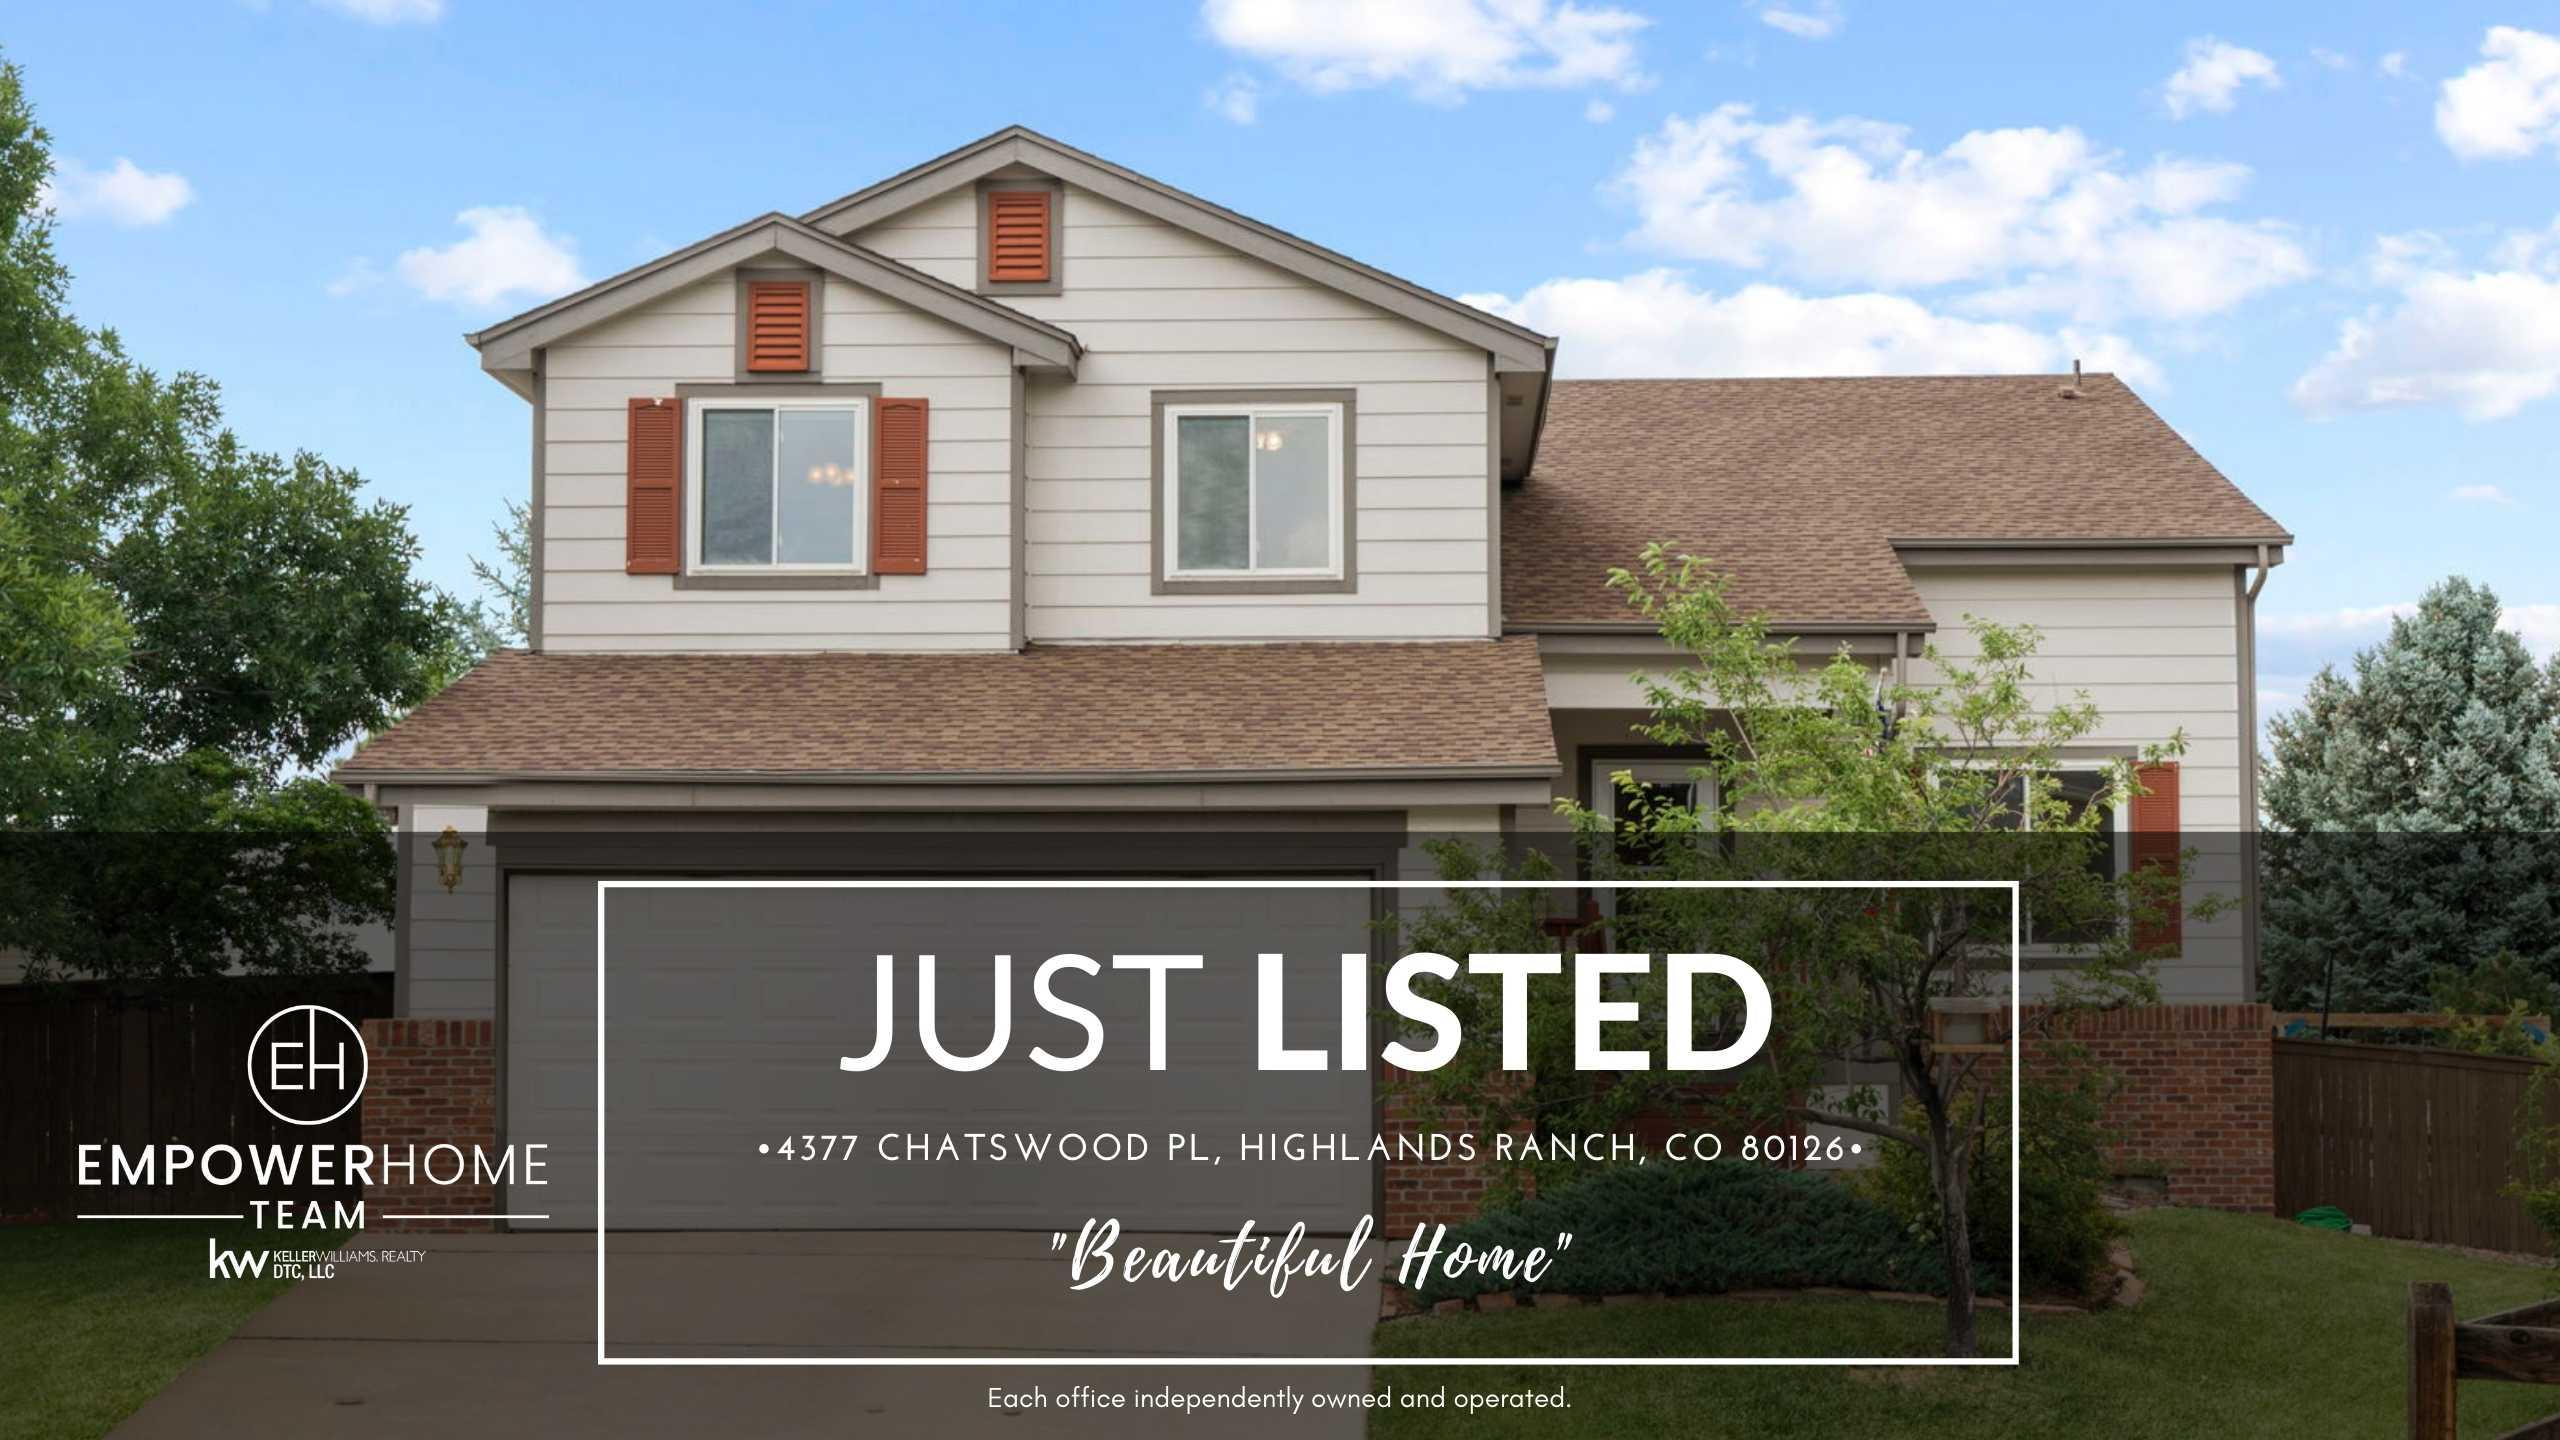 4377 Chatswood Pl, Highlands Ranch, CO 80126